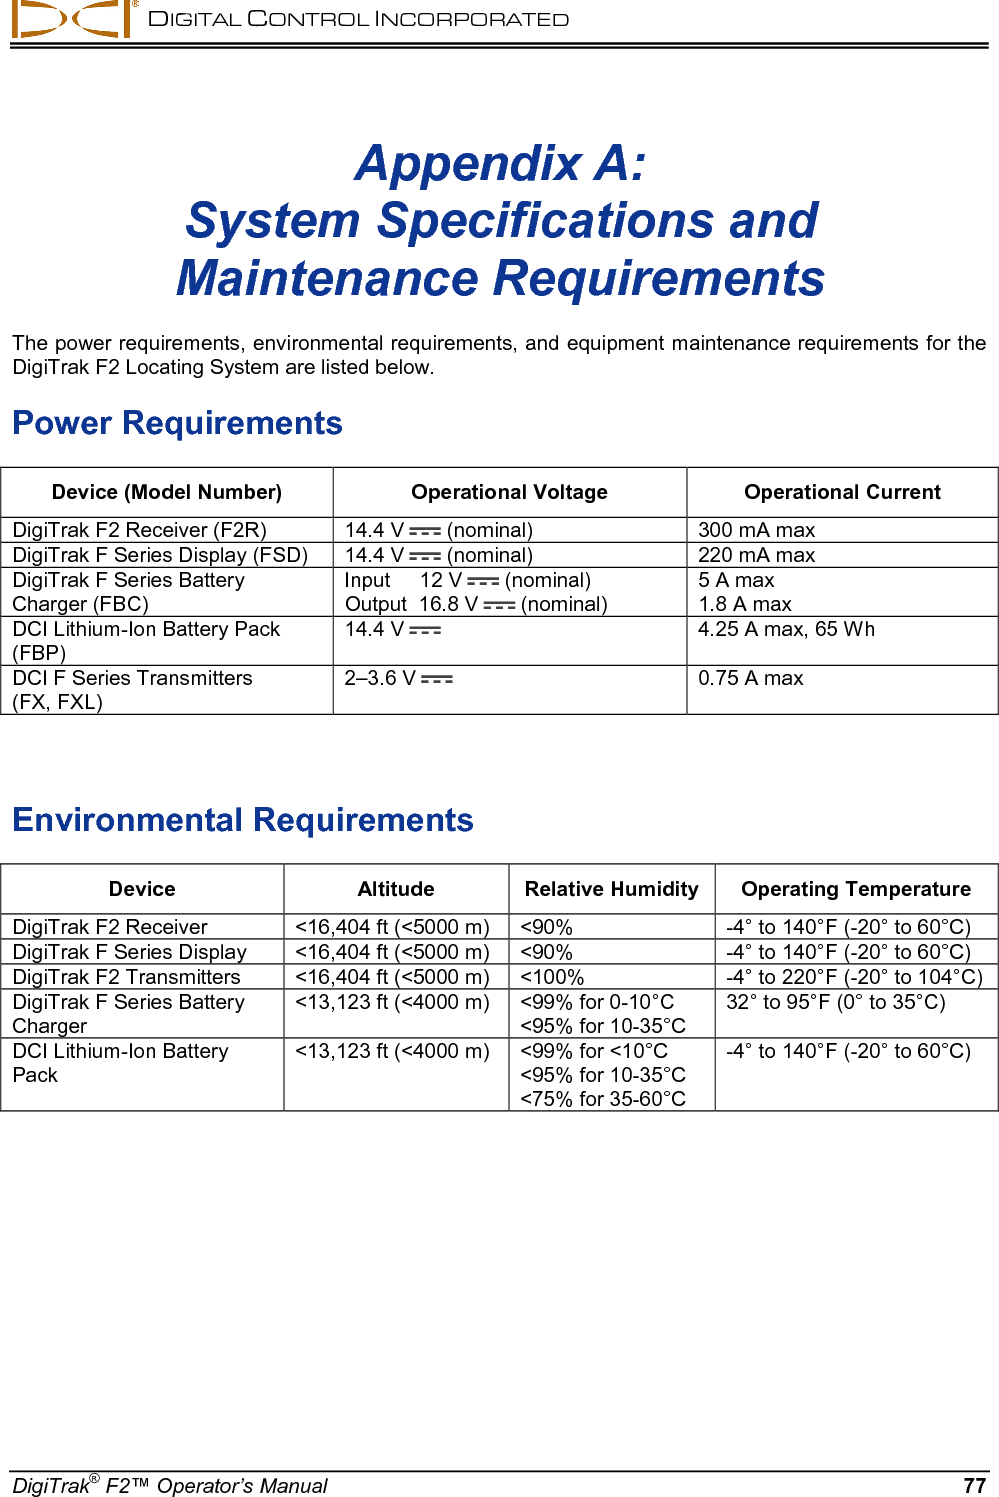  DIGITAL CONTROL INCORPORATED  DigiTrak® F2™ Operator’s Manual 77 Appendix A:  System Specifications and  Maintenance Requirements  The power requirements, environmental requirements, and equipment maintenance requirements for the DigiTrak F2 Locating System are listed below. Power Requirements Device (Model Number) Operational Voltage Operational Current DigiTrak F2 Receiver (F2R) 14.4 V  (nominal) 300 mA max DigiTrak F Series Display (FSD) 14.4 V  (nominal) 220 mA max DigiTrak F Series Battery Charger (FBC) Input     12 V  (nominal) Output  16.8 V  (nominal) 5 A max 1.8 A max  DCI Lithium-Ion Battery Pack (FBP) 14.4 V  4.25 A max, 65 Wh  DCI F Series Transmitters  (FX, FXL) 2–3.6 V  0.75 A max   Environmental Requirements Device Altitude  Relative Humidity Operating Temperature DigiTrak F2 Receiver &lt;16,404 ft (&lt;5000 m) &lt;90% -4° to 140°F (-20° to 60°C) DigiTrak F Series Display &lt;16,404 ft (&lt;5000 m) &lt;90% -4° to 140°F (-20° to 60°C) DigiTrak F2 Transmitters &lt;16,404 ft (&lt;5000 m) &lt;100% -4° to 220°F (-20° to 104°C) DigiTrak F Series Battery Charger &lt;13,123 ft (&lt;4000 m) &lt;99% for 0-10°C &lt;95% for 10-35°C 32° to 95°F (0° to 35°C) DCI Lithium-Ion Battery Pack &lt;13,123 ft (&lt;4000 m) &lt;99% for &lt;10°C &lt;95% for 10-35°C &lt;75% for 35-60°C -4° to 140°F (-20° to 60°C)  